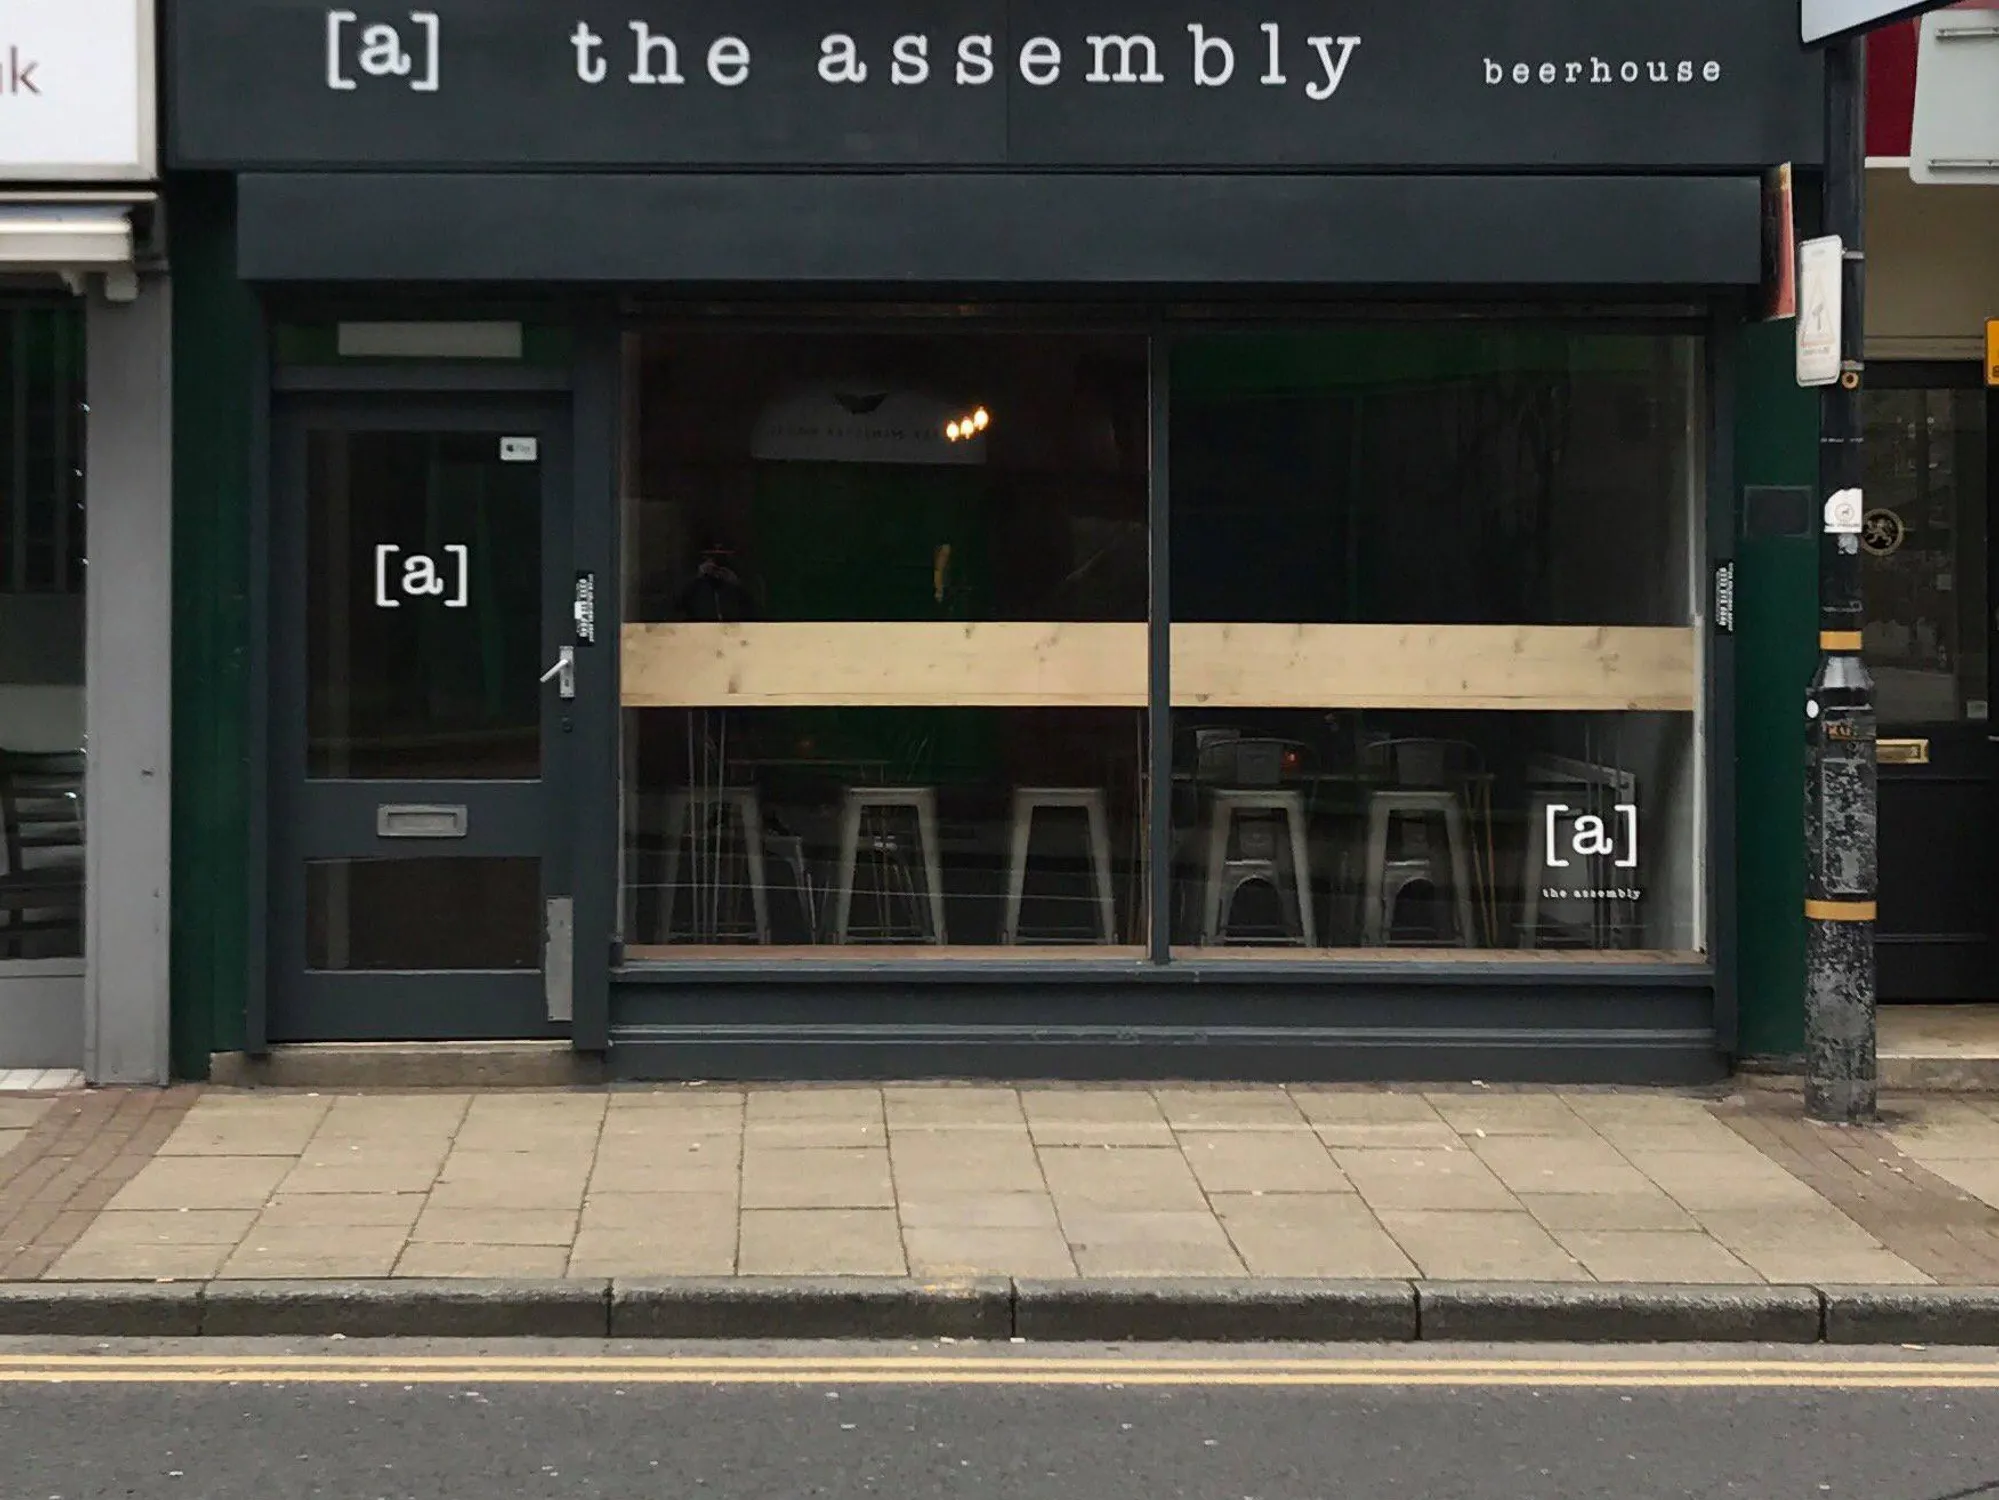 The assembly